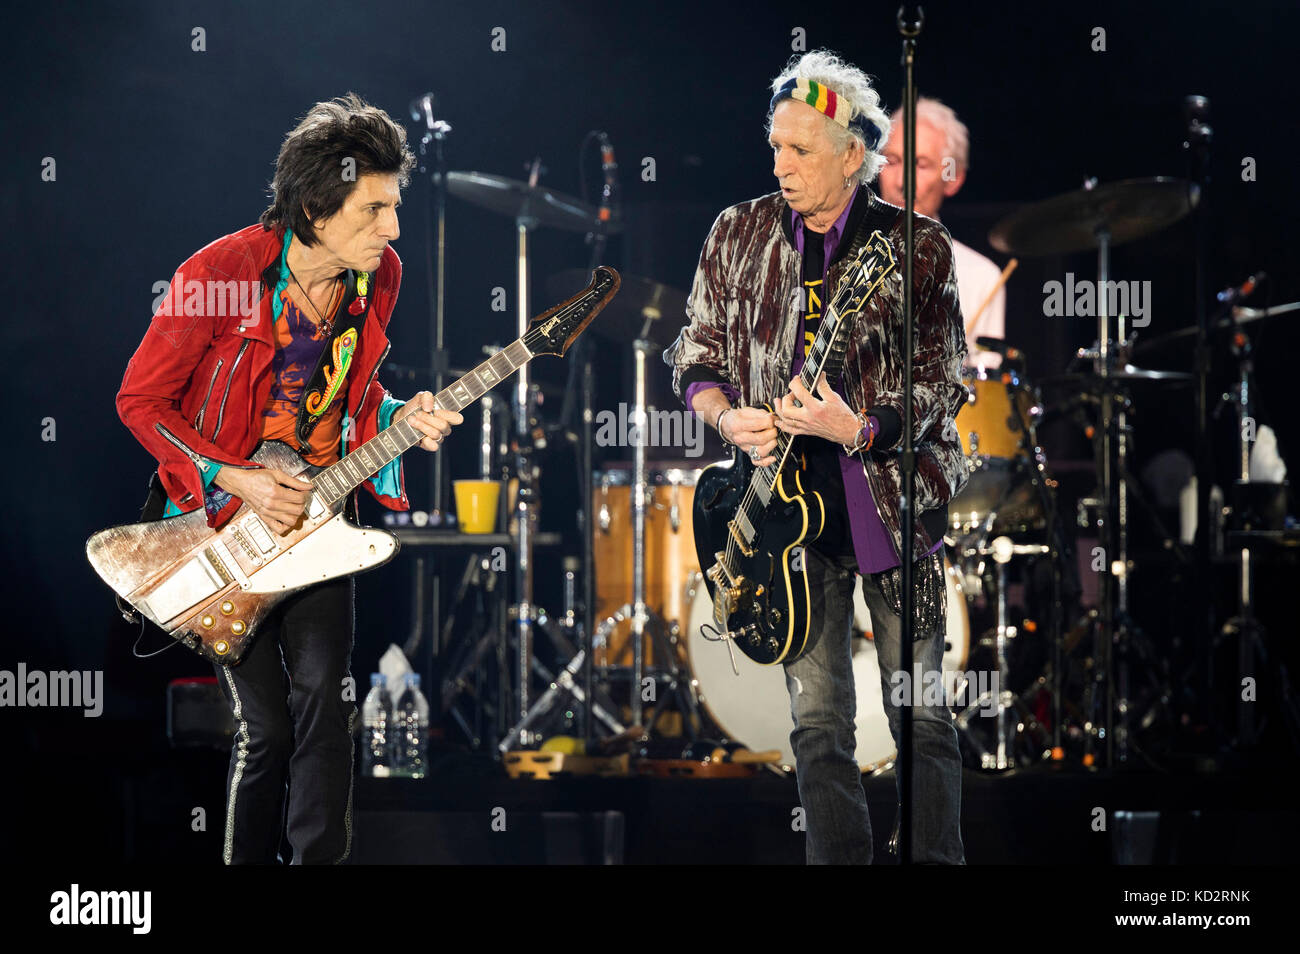 Dusseldorf, Germany. 09th Oct, 2017. Ron Wood, Keith Richards and Charlie Watts of The Rolling Stones perform live on stage during the 'No Filter' Europe Tour at Esprit Arena on October 9, 2017 in Dusseldorf, Germany. Credit: Geisler-Fotopress/Alamy Live News Stock Photo